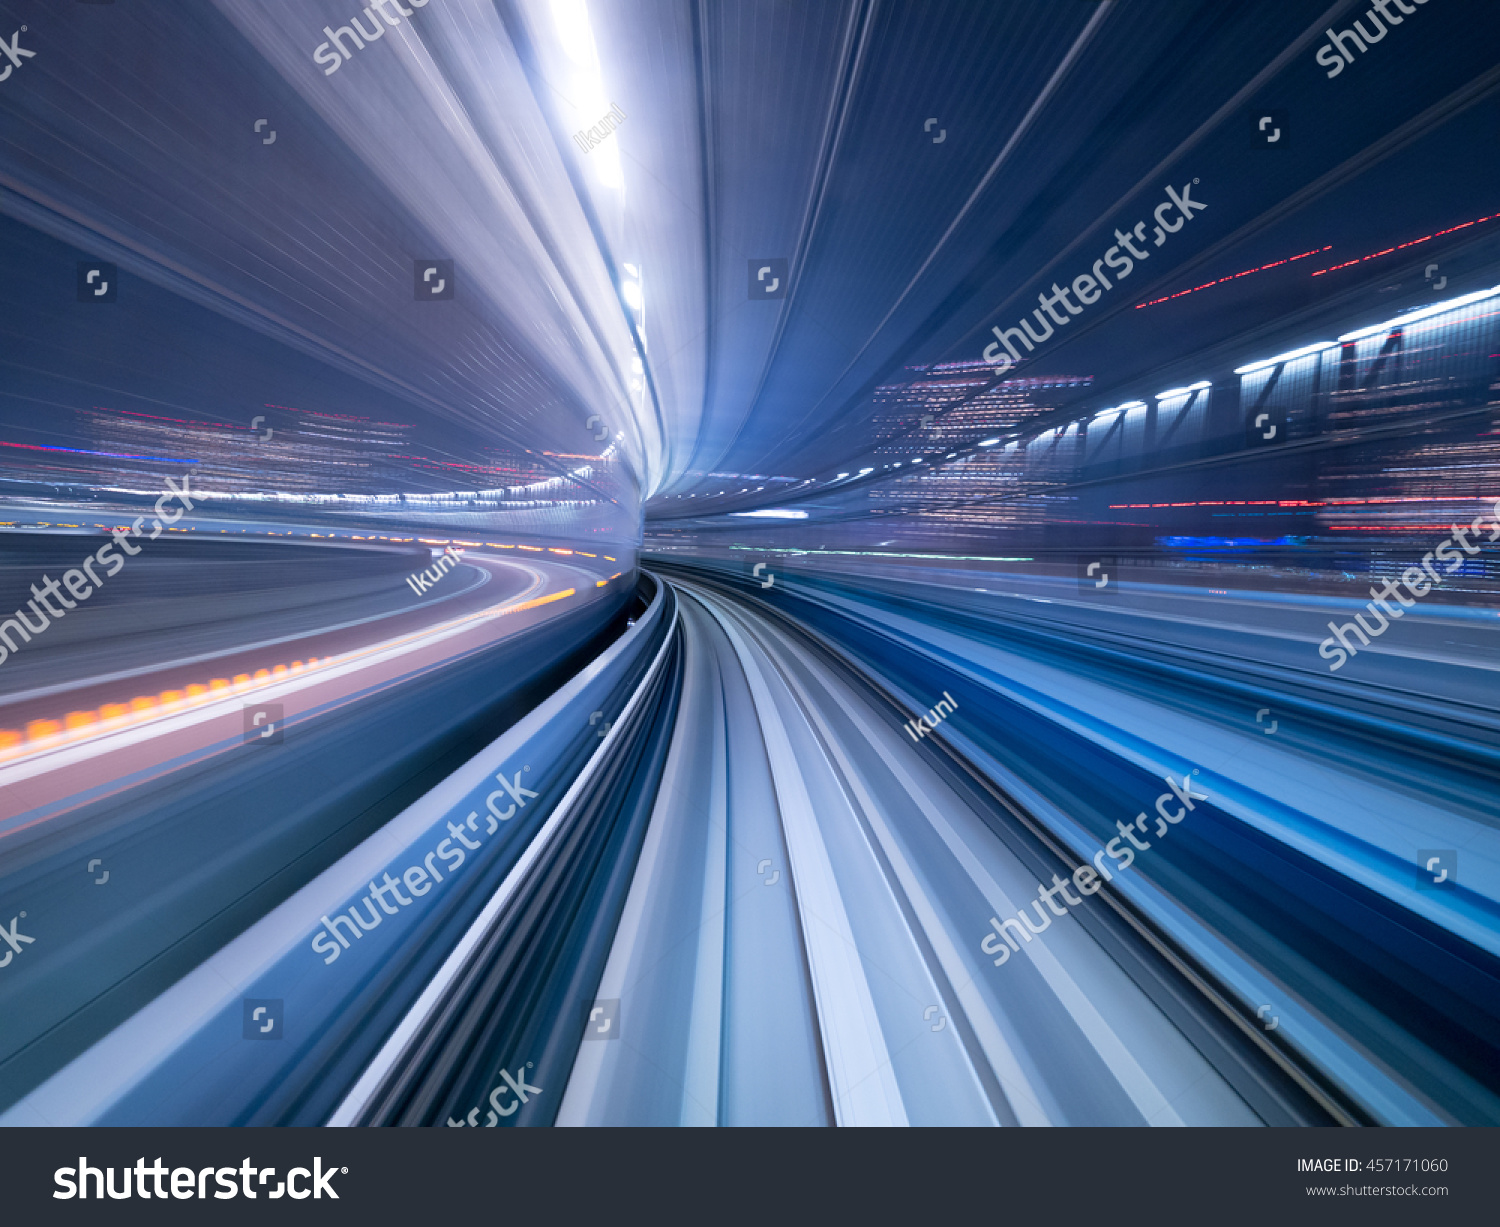 Motion blur of train moving inside tunnel in Tokyo, Japan #457171060